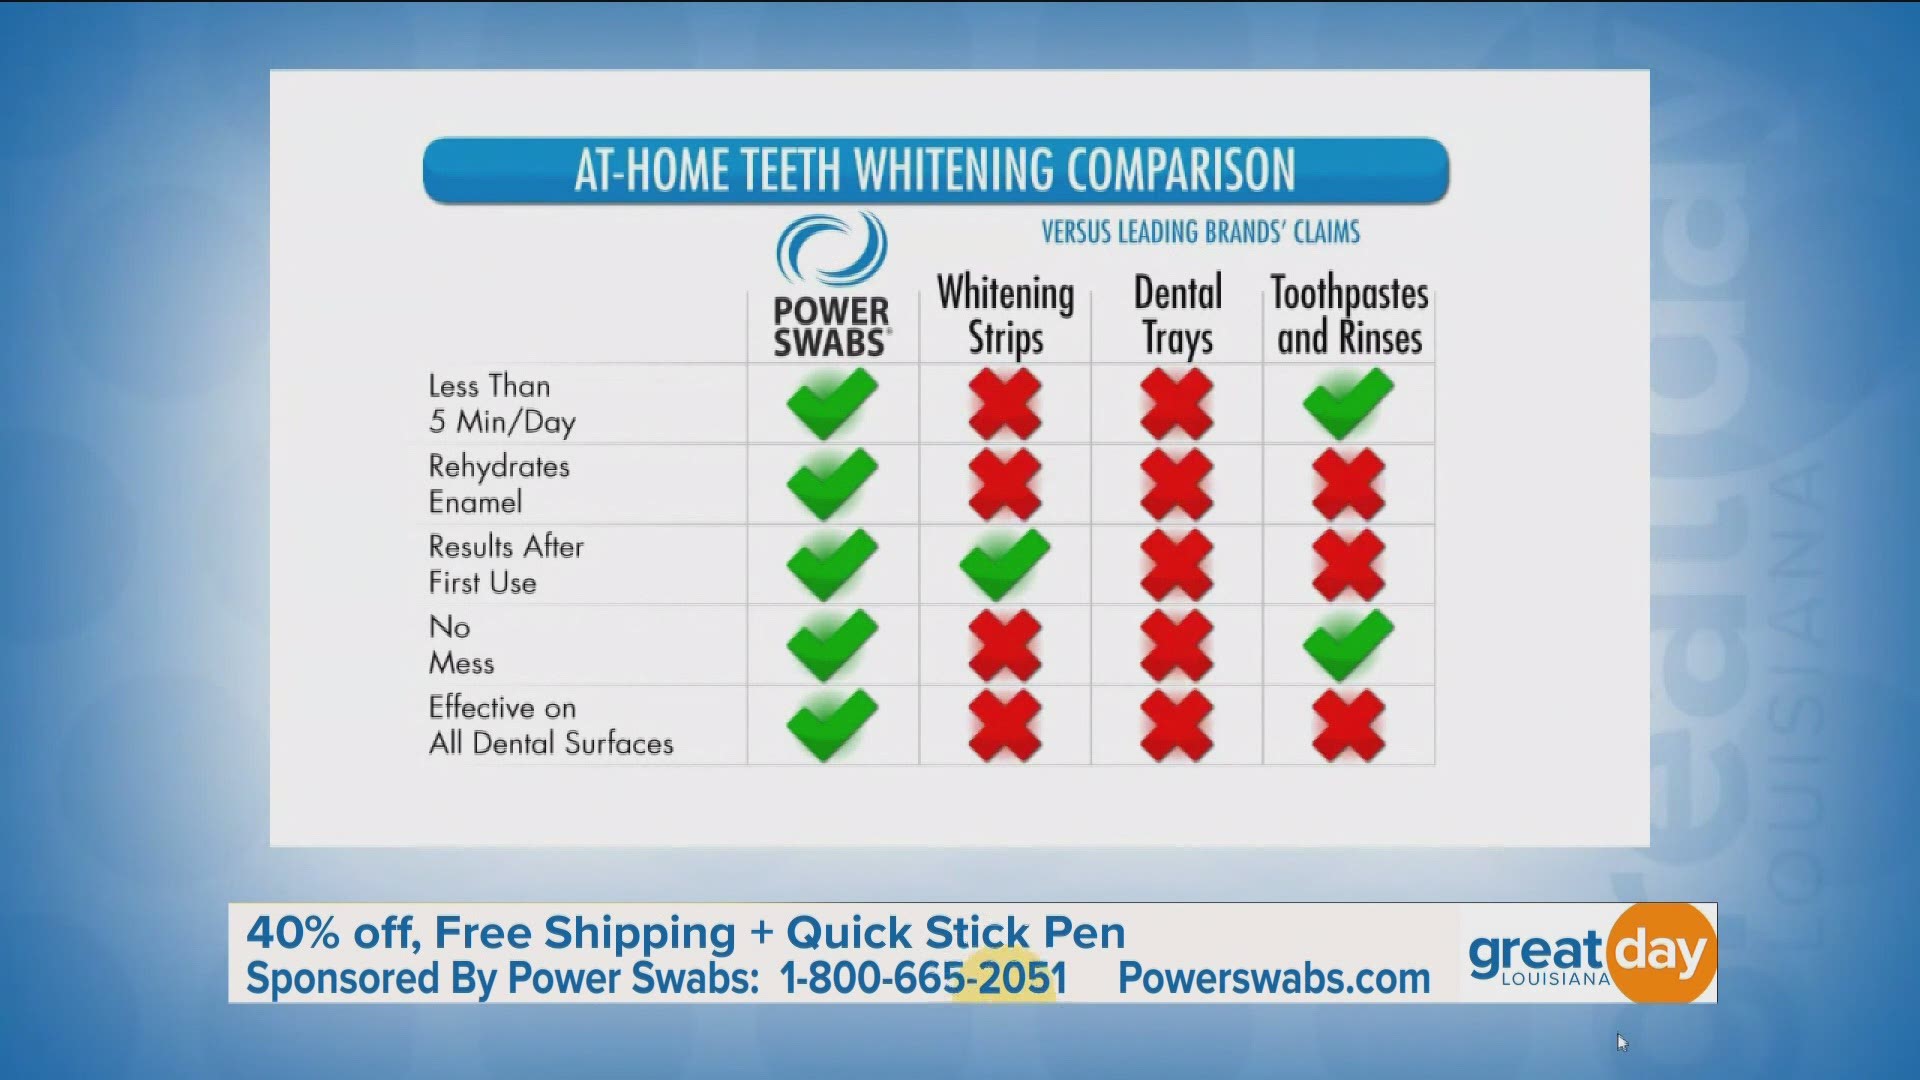 To take advantage of this offer, call 1-800-665-2051 or visit Powerswabs.com